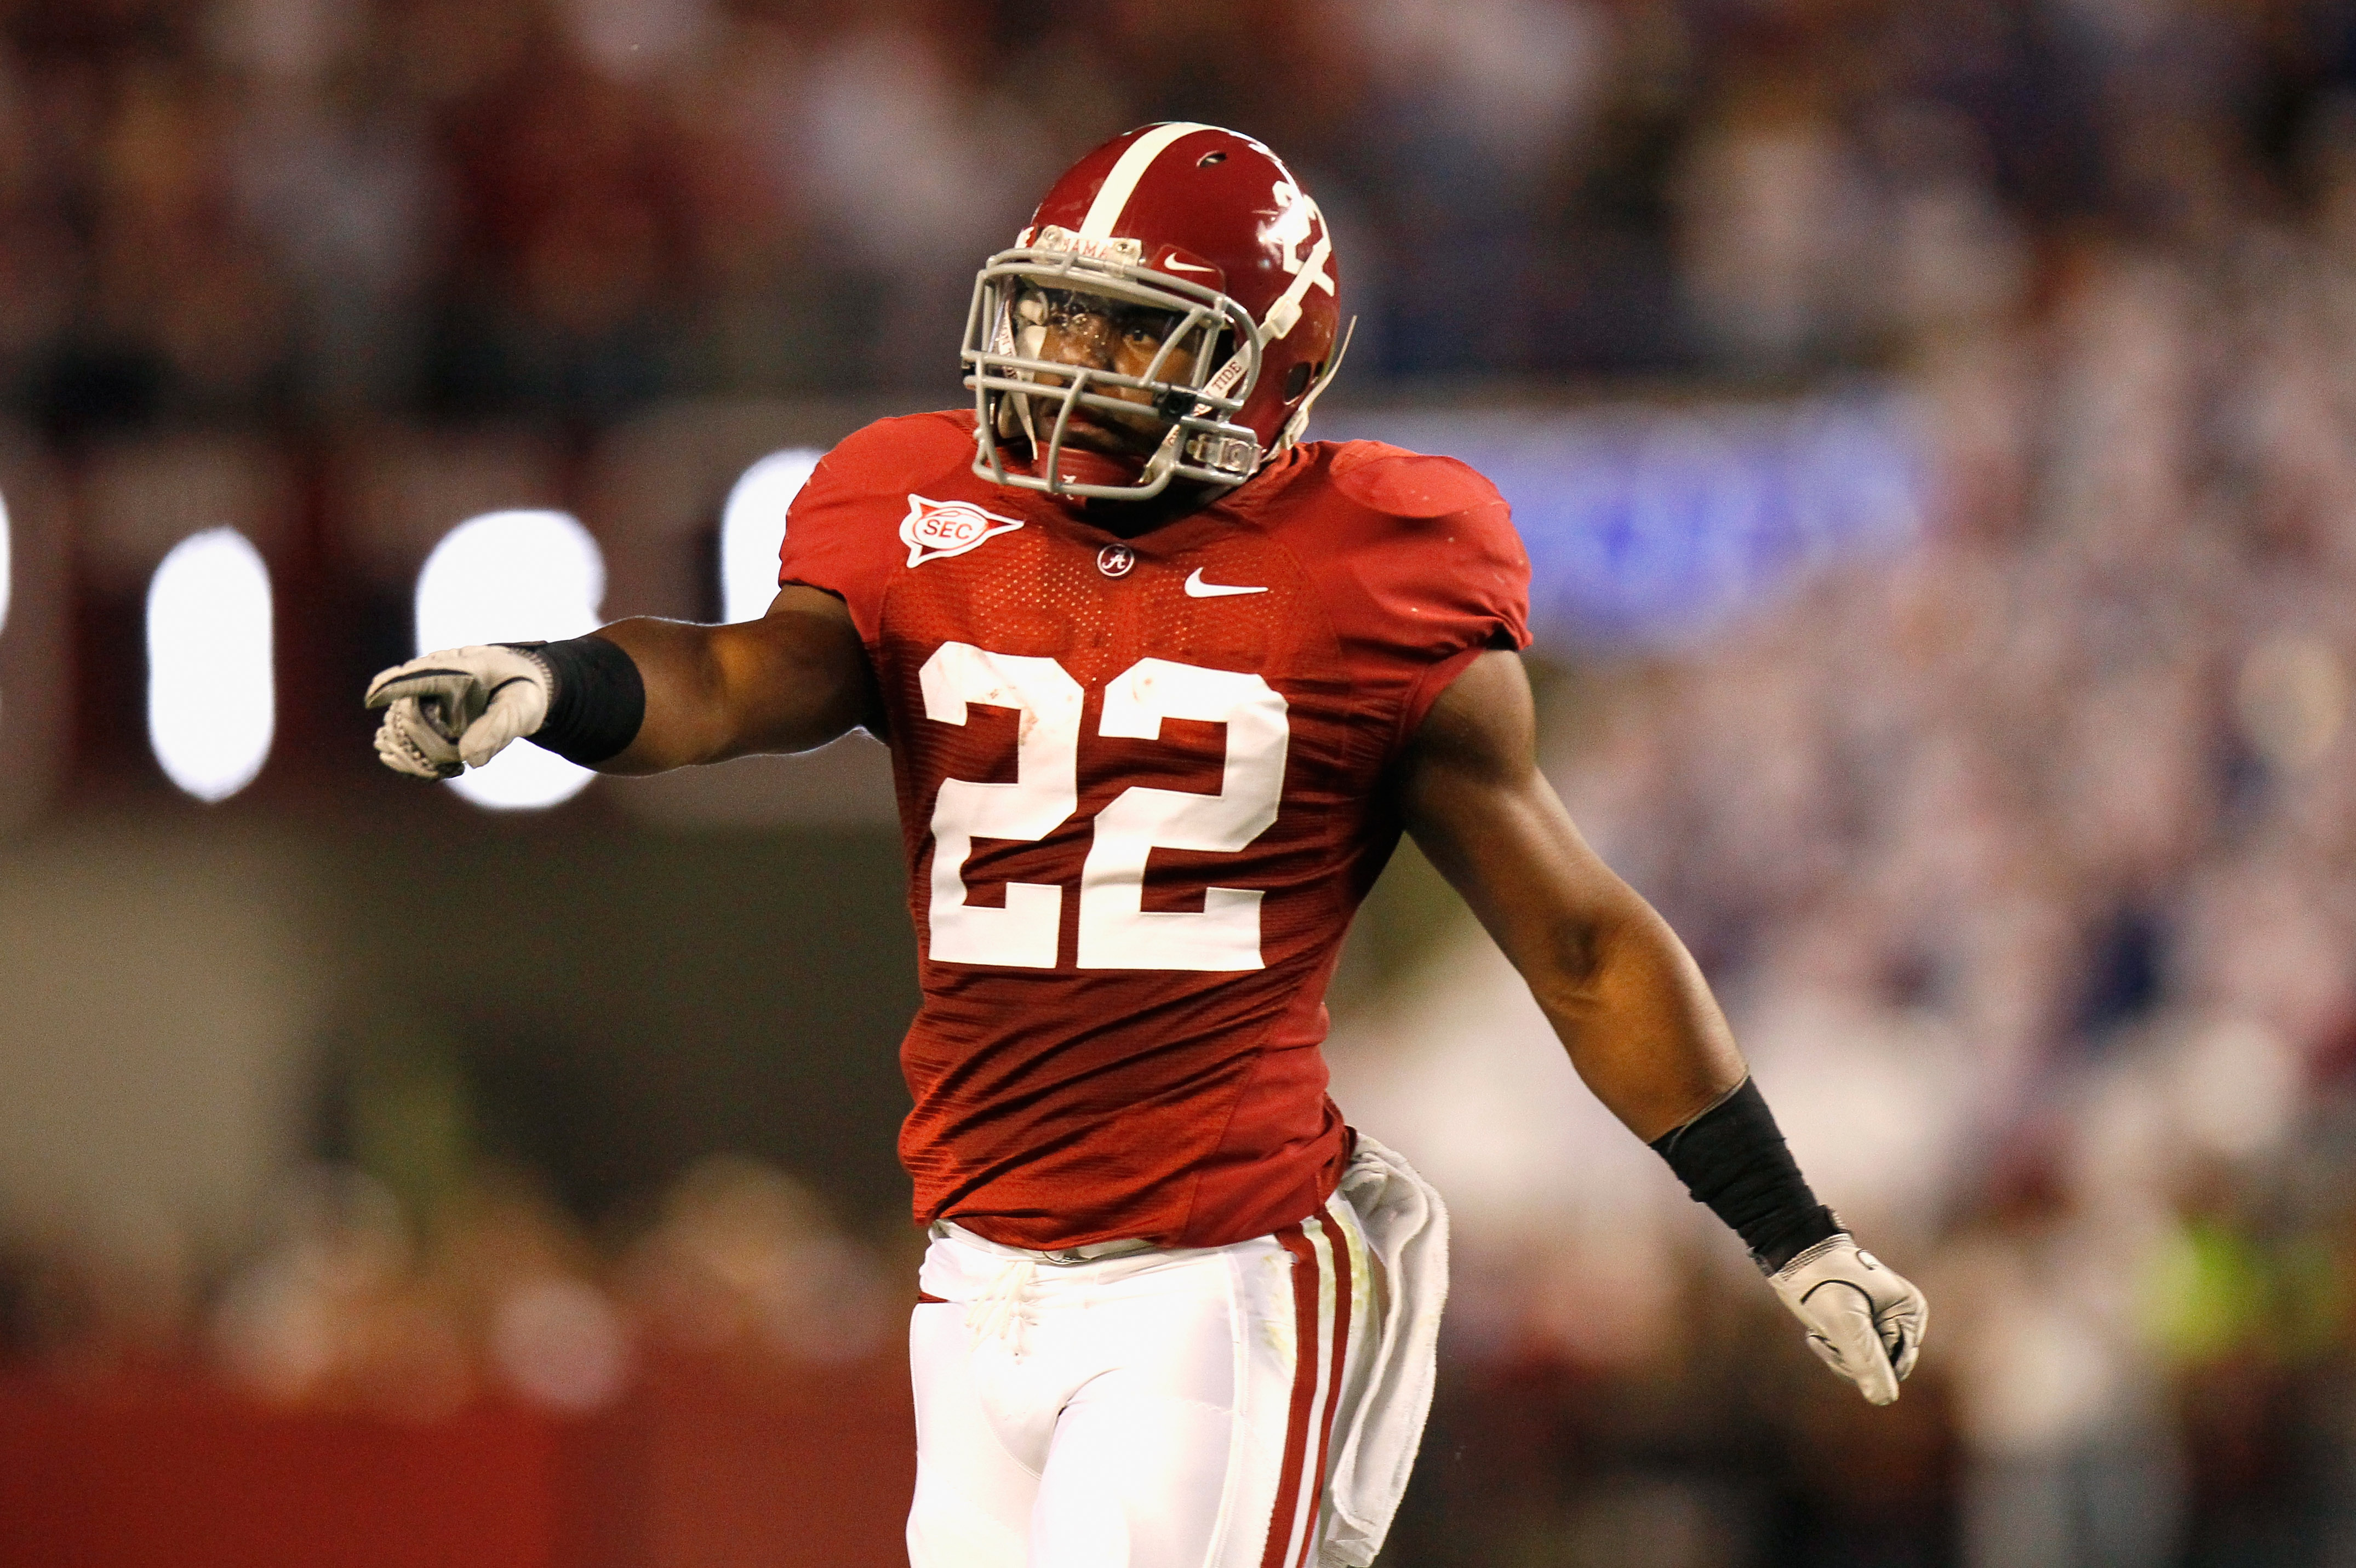 TUSCALOOSA, AL - OCTOBER 02:  Mark Ingram #22 of the Alabama Crimson Tide against the Florida Gators at Bryant-Denny Stadium on October 2, 2010 in Tuscaloosa, Alabama.  (Photo by Kevin C. Cox/Getty Images)